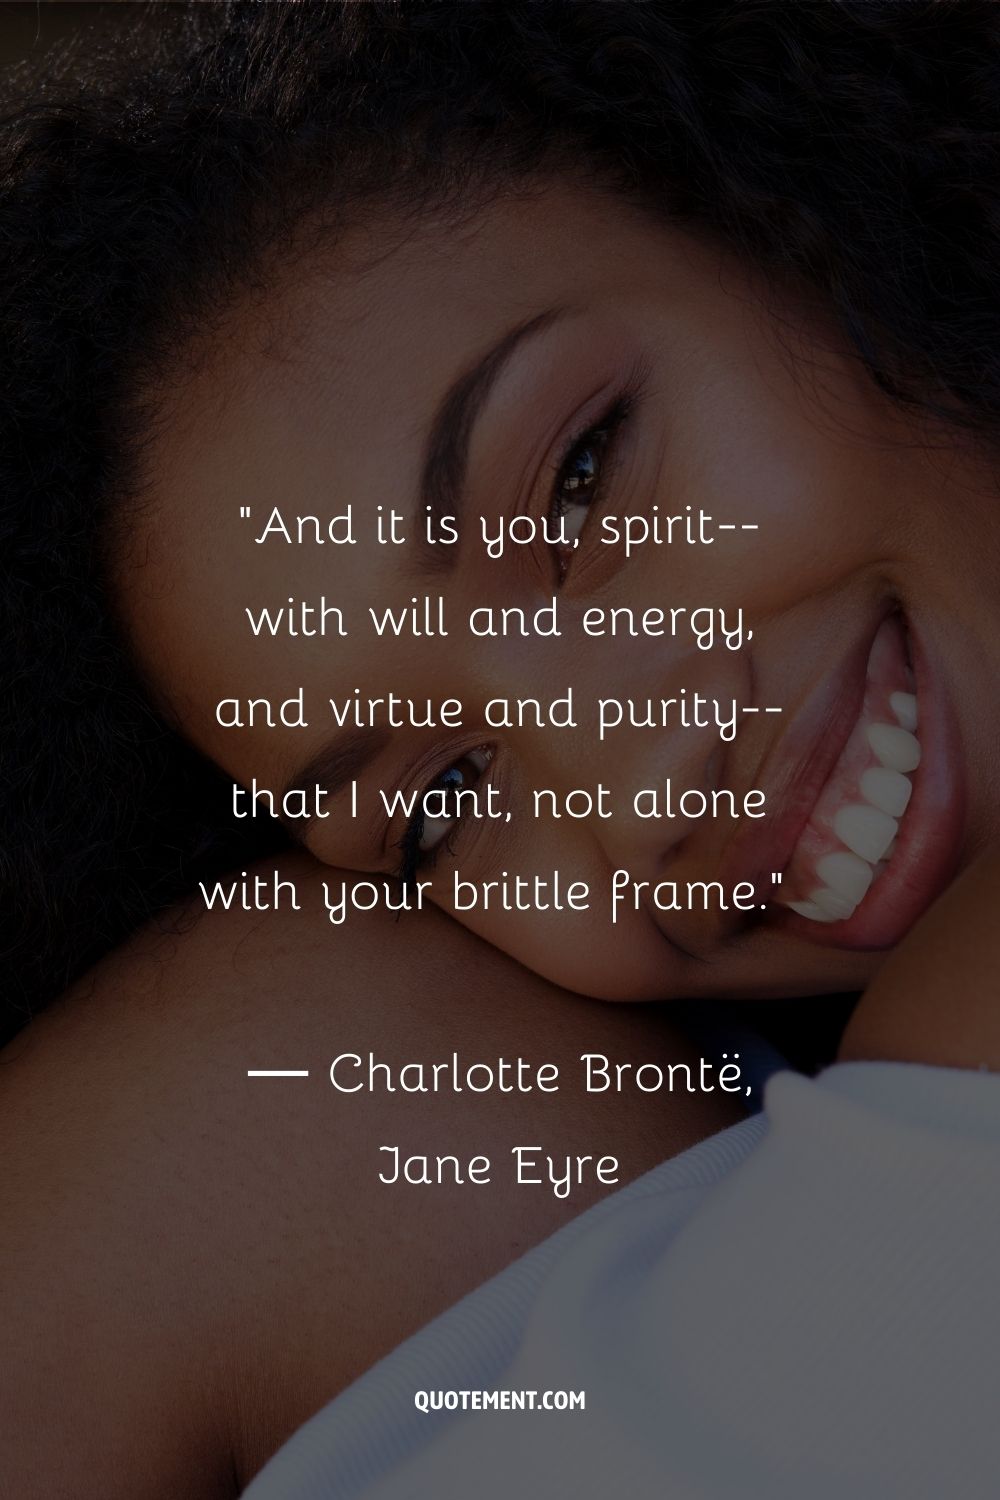 And it is you, spirit--with will and energy, and virtue and purity--that I want, not alone with your brittle frame.